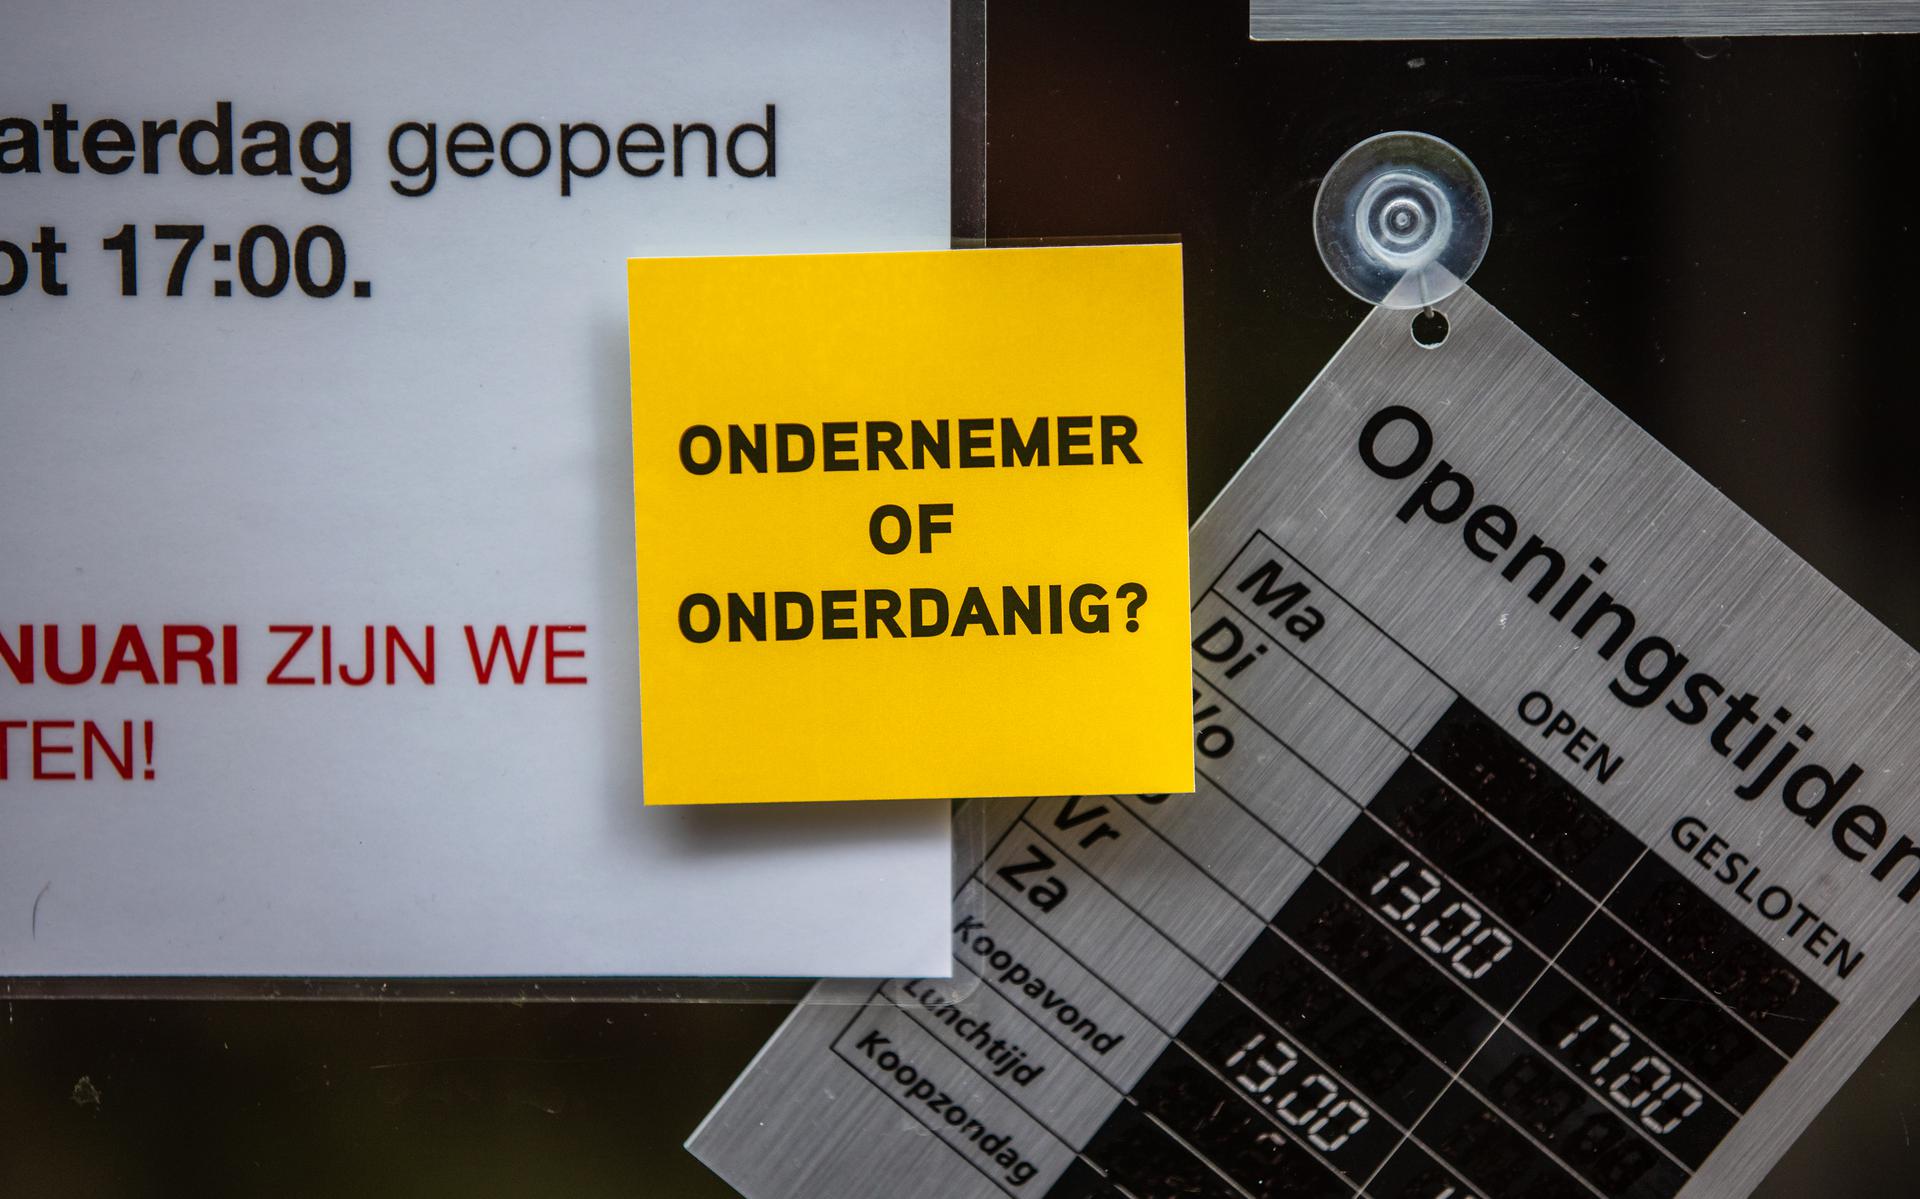 News from Friesland from January 11 |  Shopkeepers in Sneek upset about sticker on their shop window: entrepreneur or submissive?